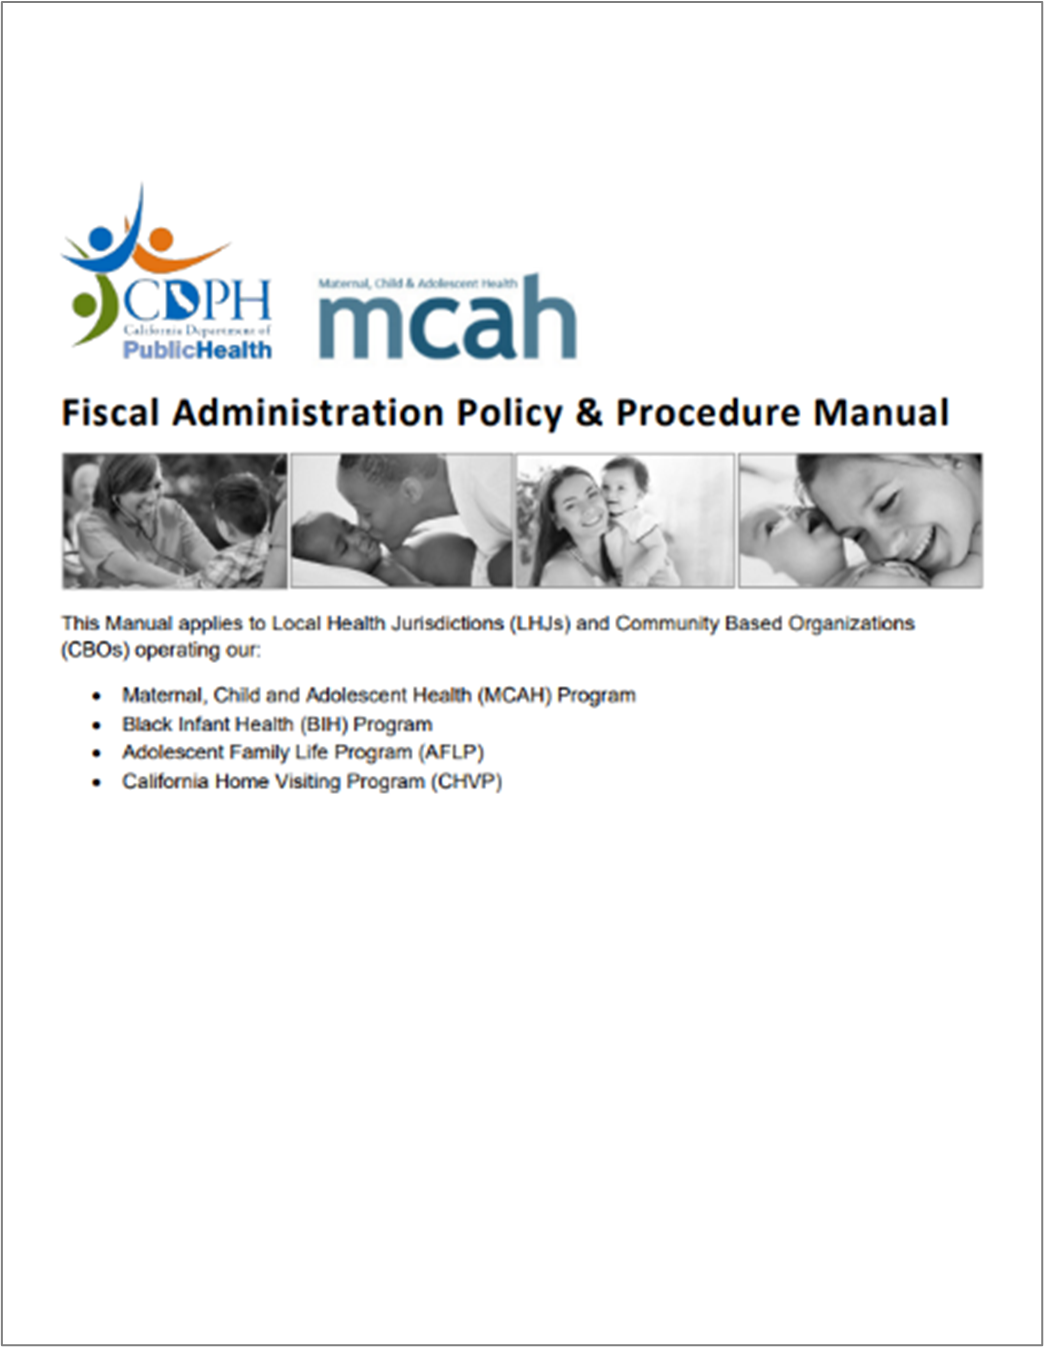 Fiscal policy and procedures cover